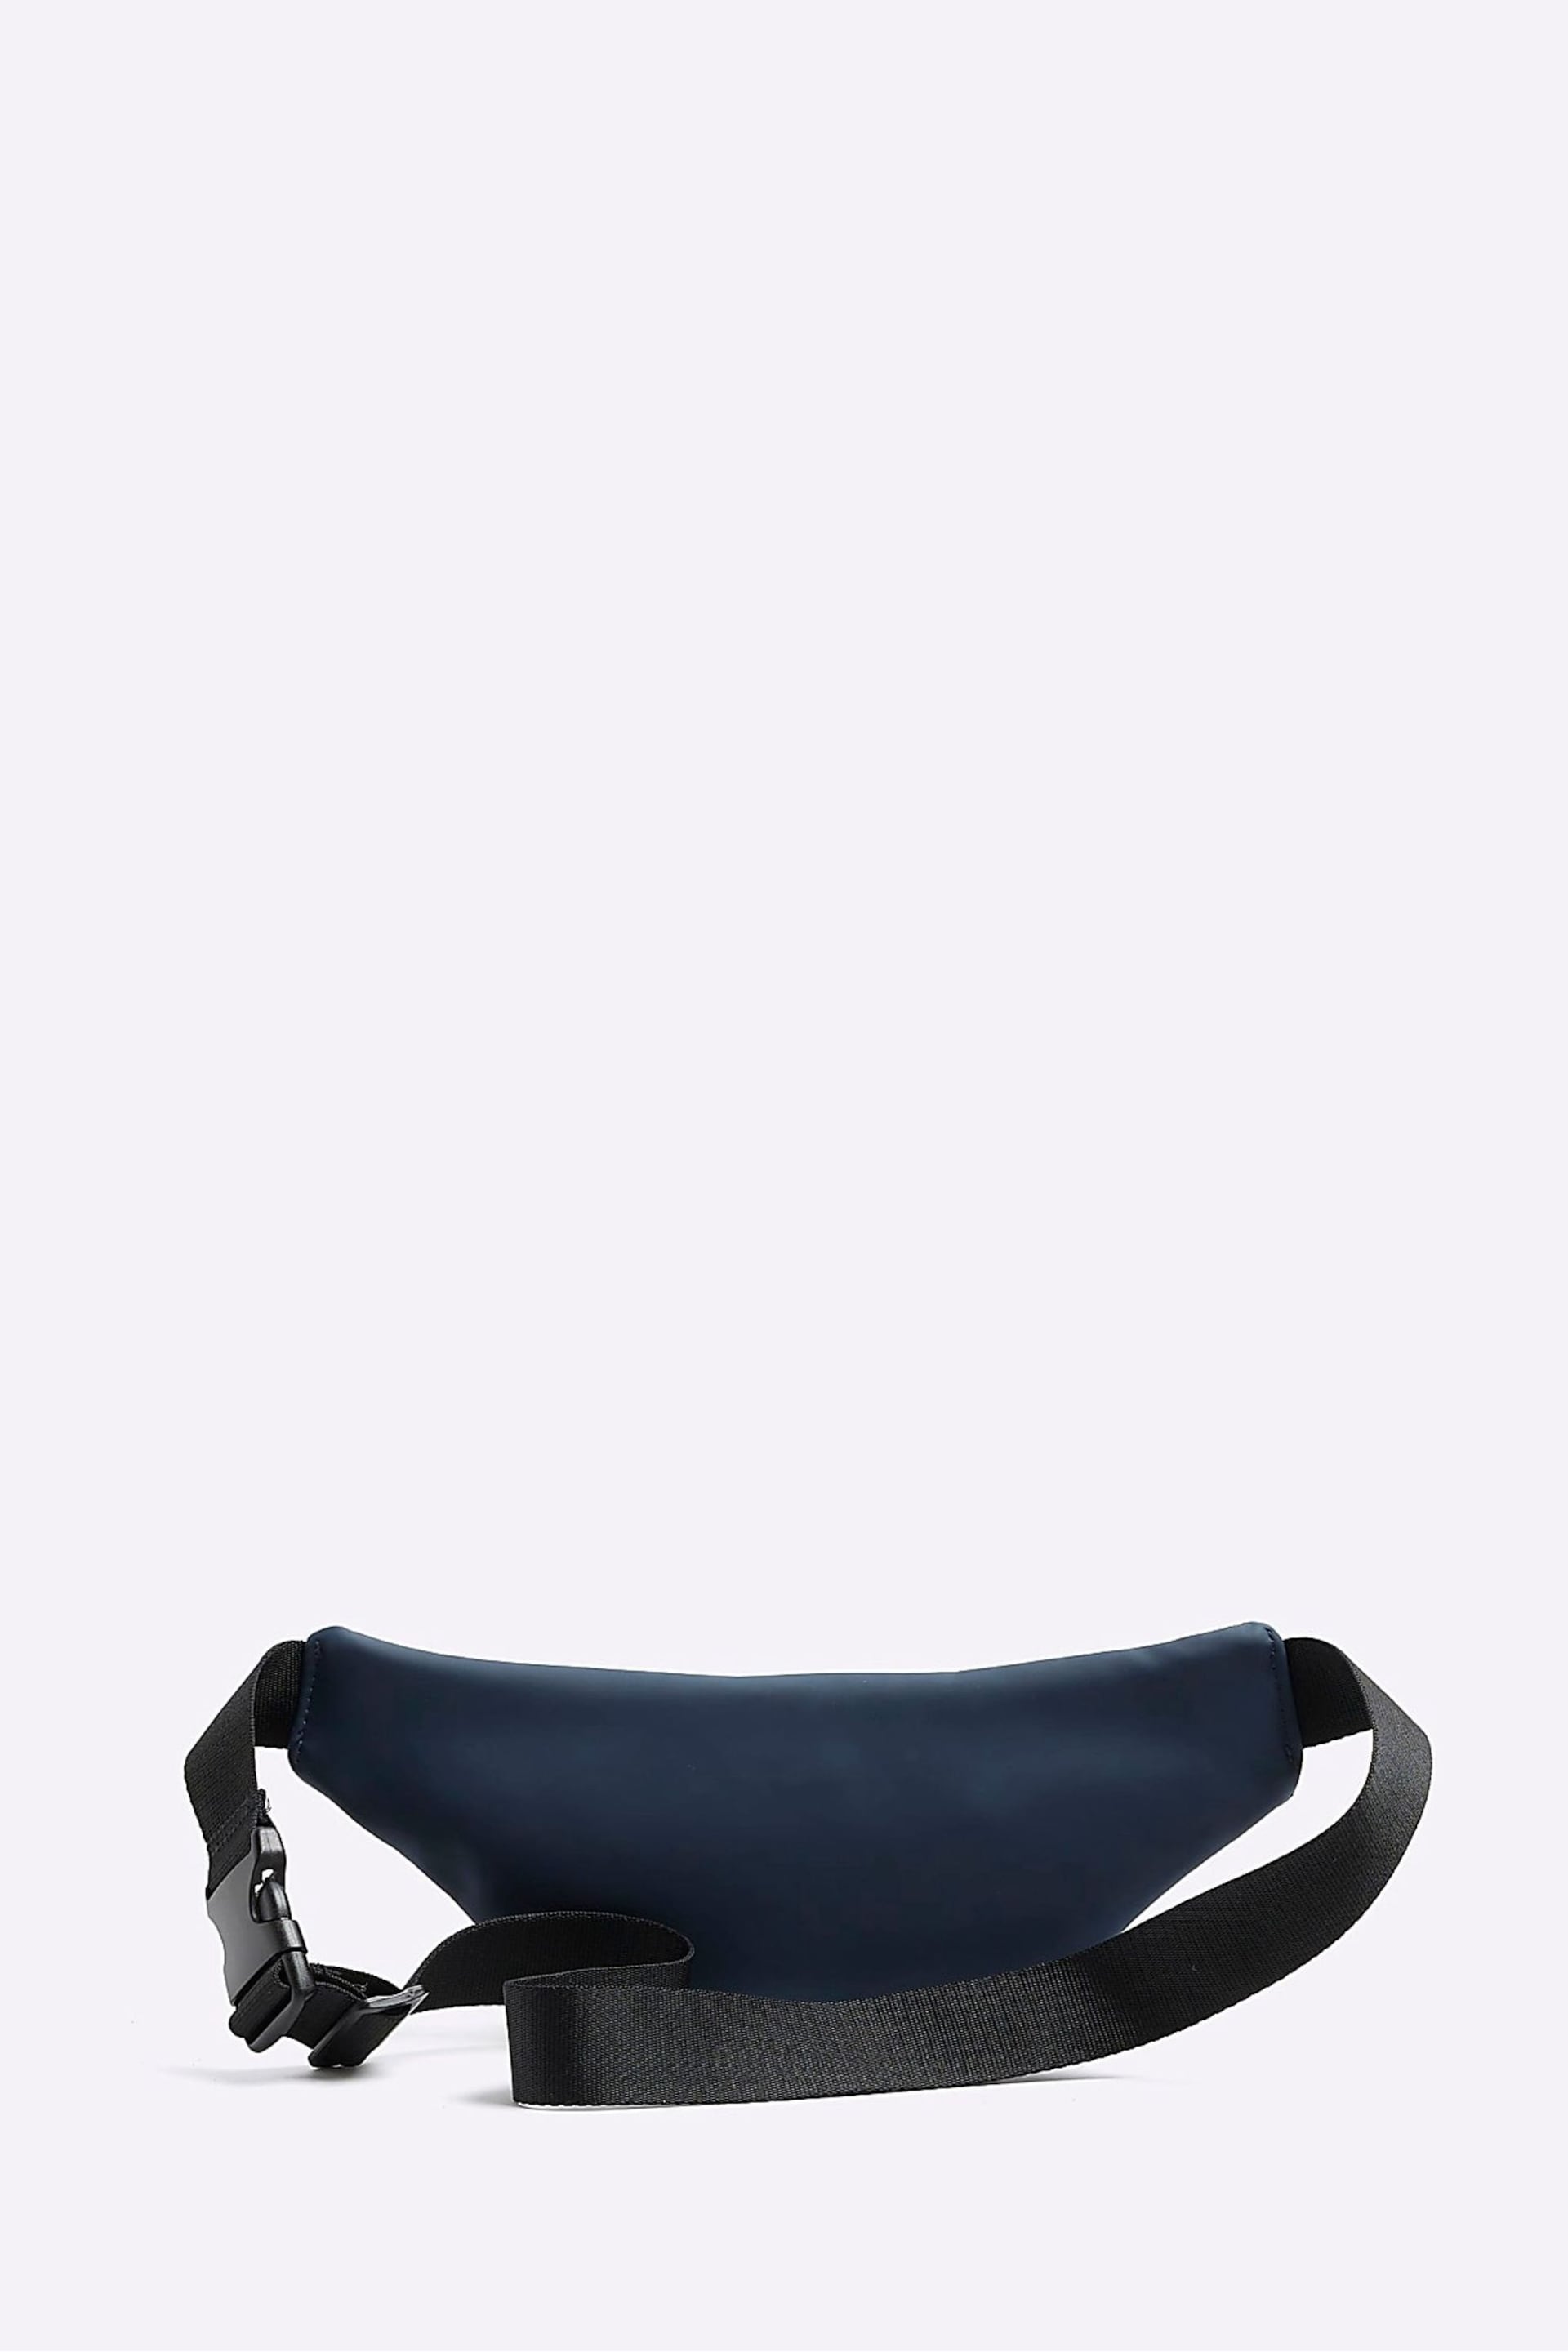 River Island Blue Rubberised Small Bumbag - Image 6 of 8